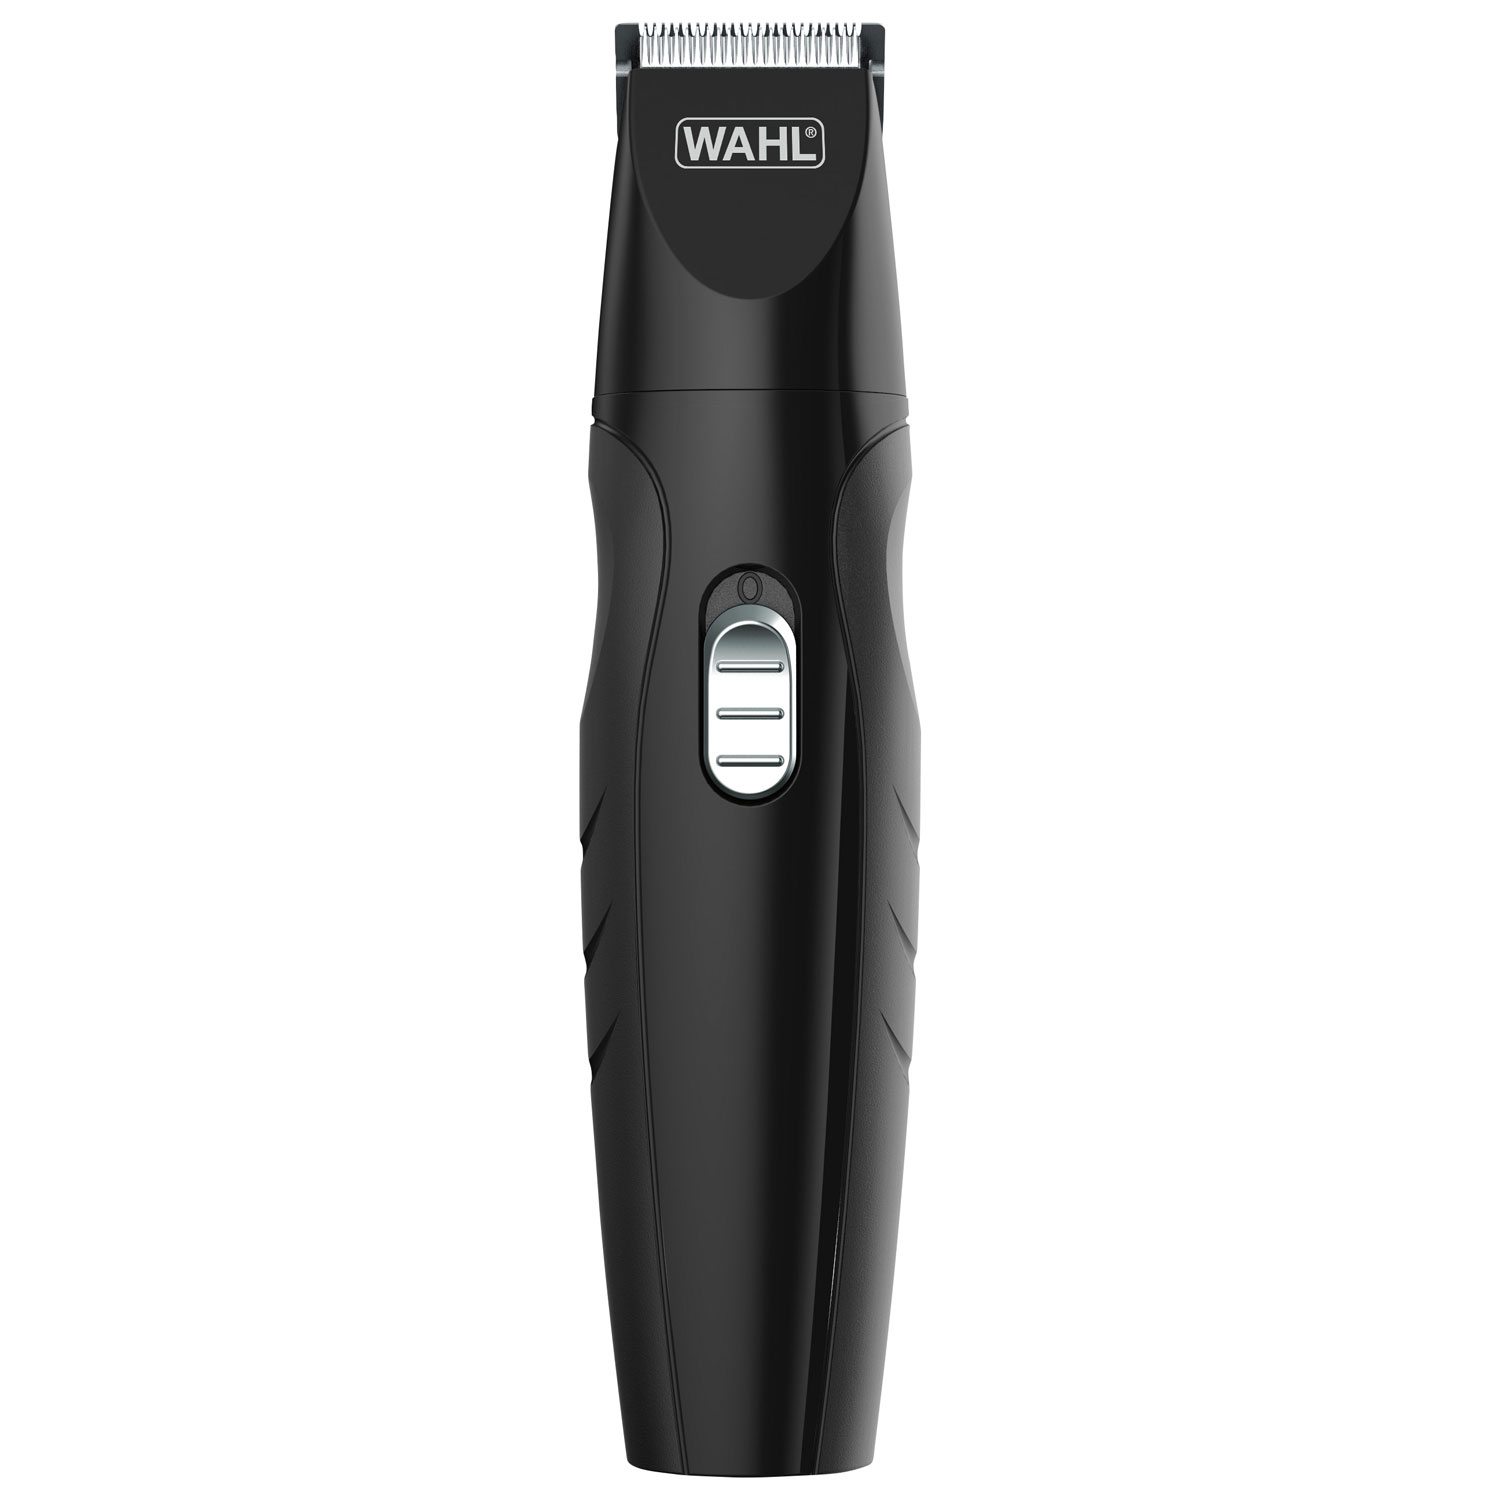 Wahl All-in-One Trimmer (3110)